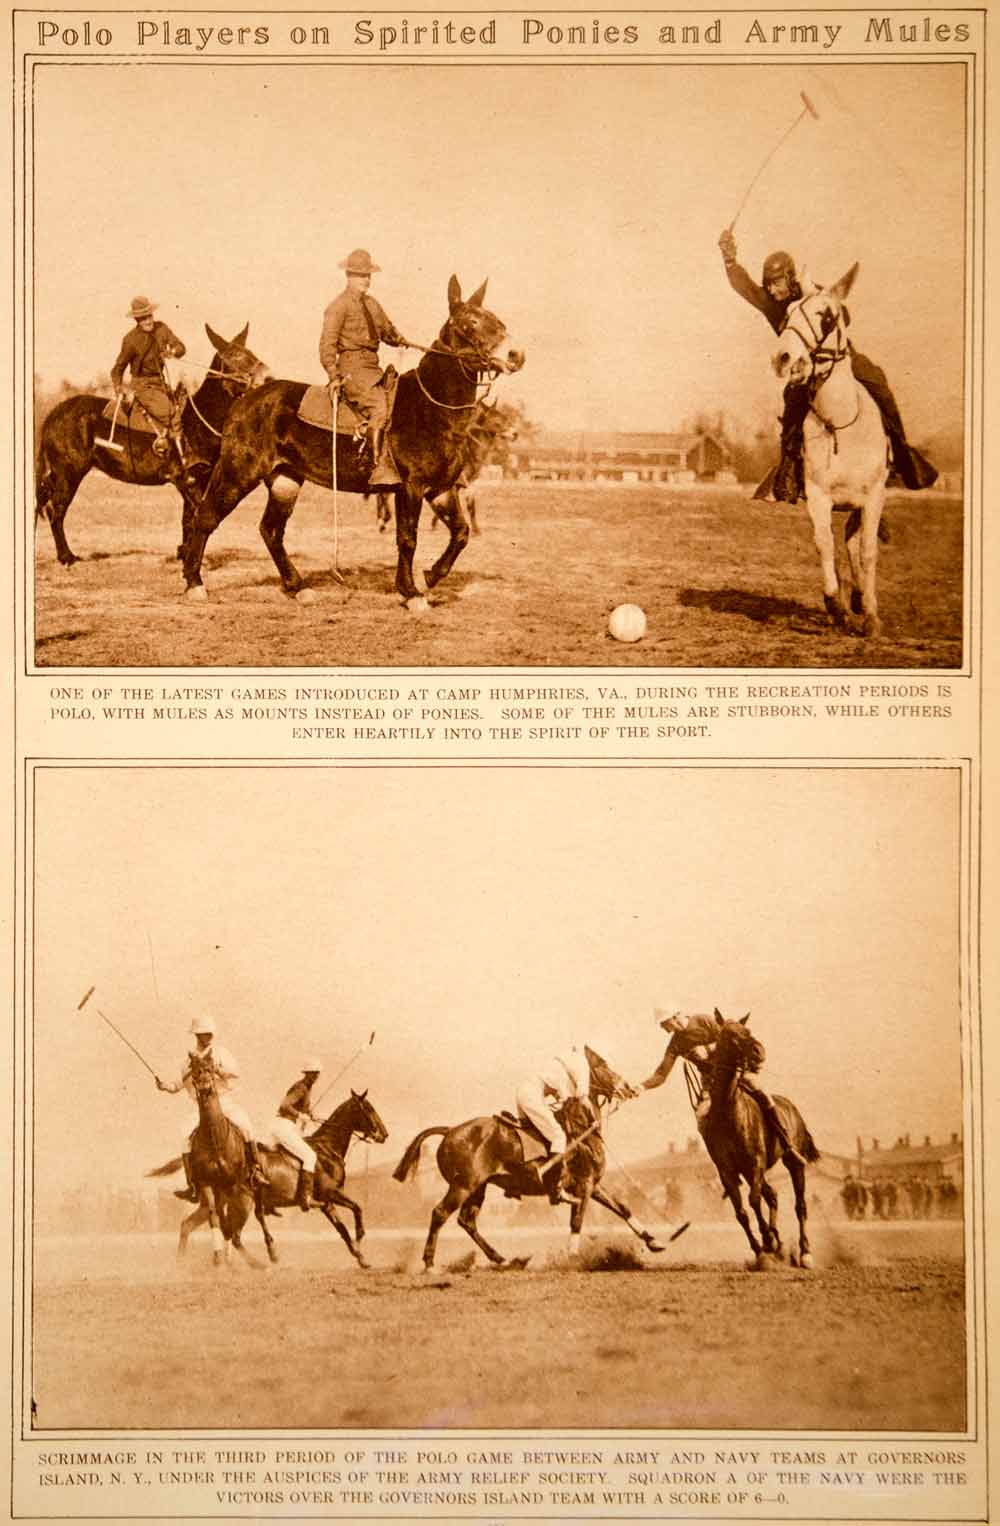 1923 Rotogravure Polo Players Game Army Navy Teams Mules Ponies Horseback Sport